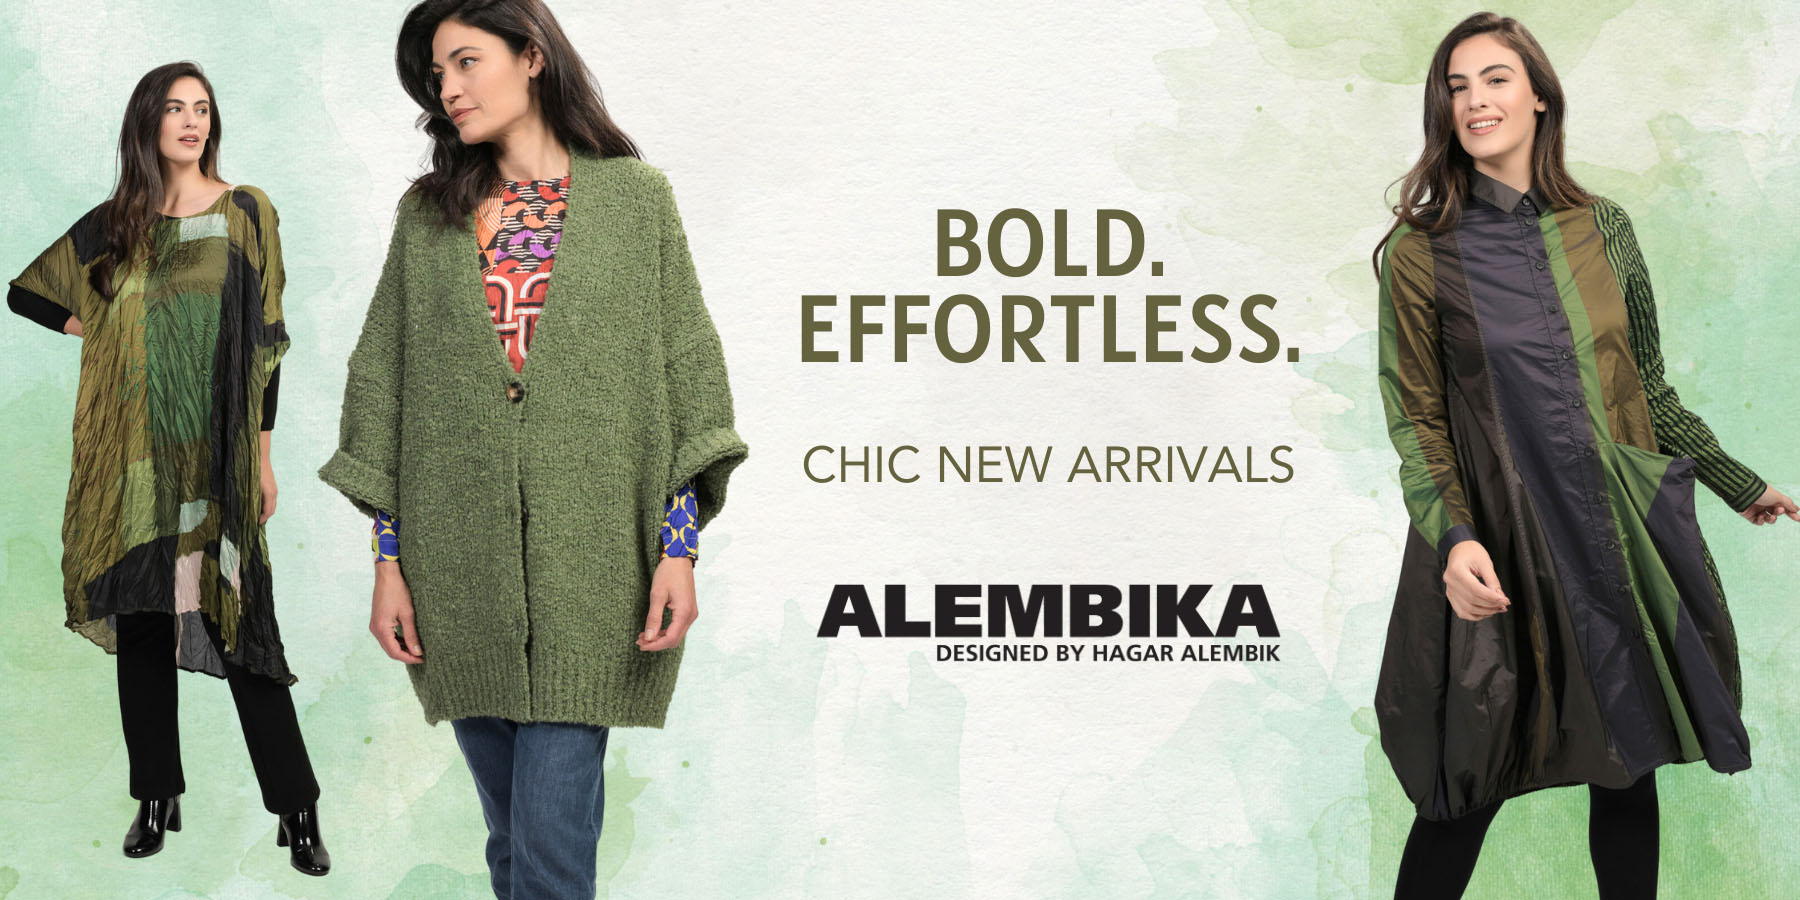 Alembika Bold Effortless Chic New Arrivals